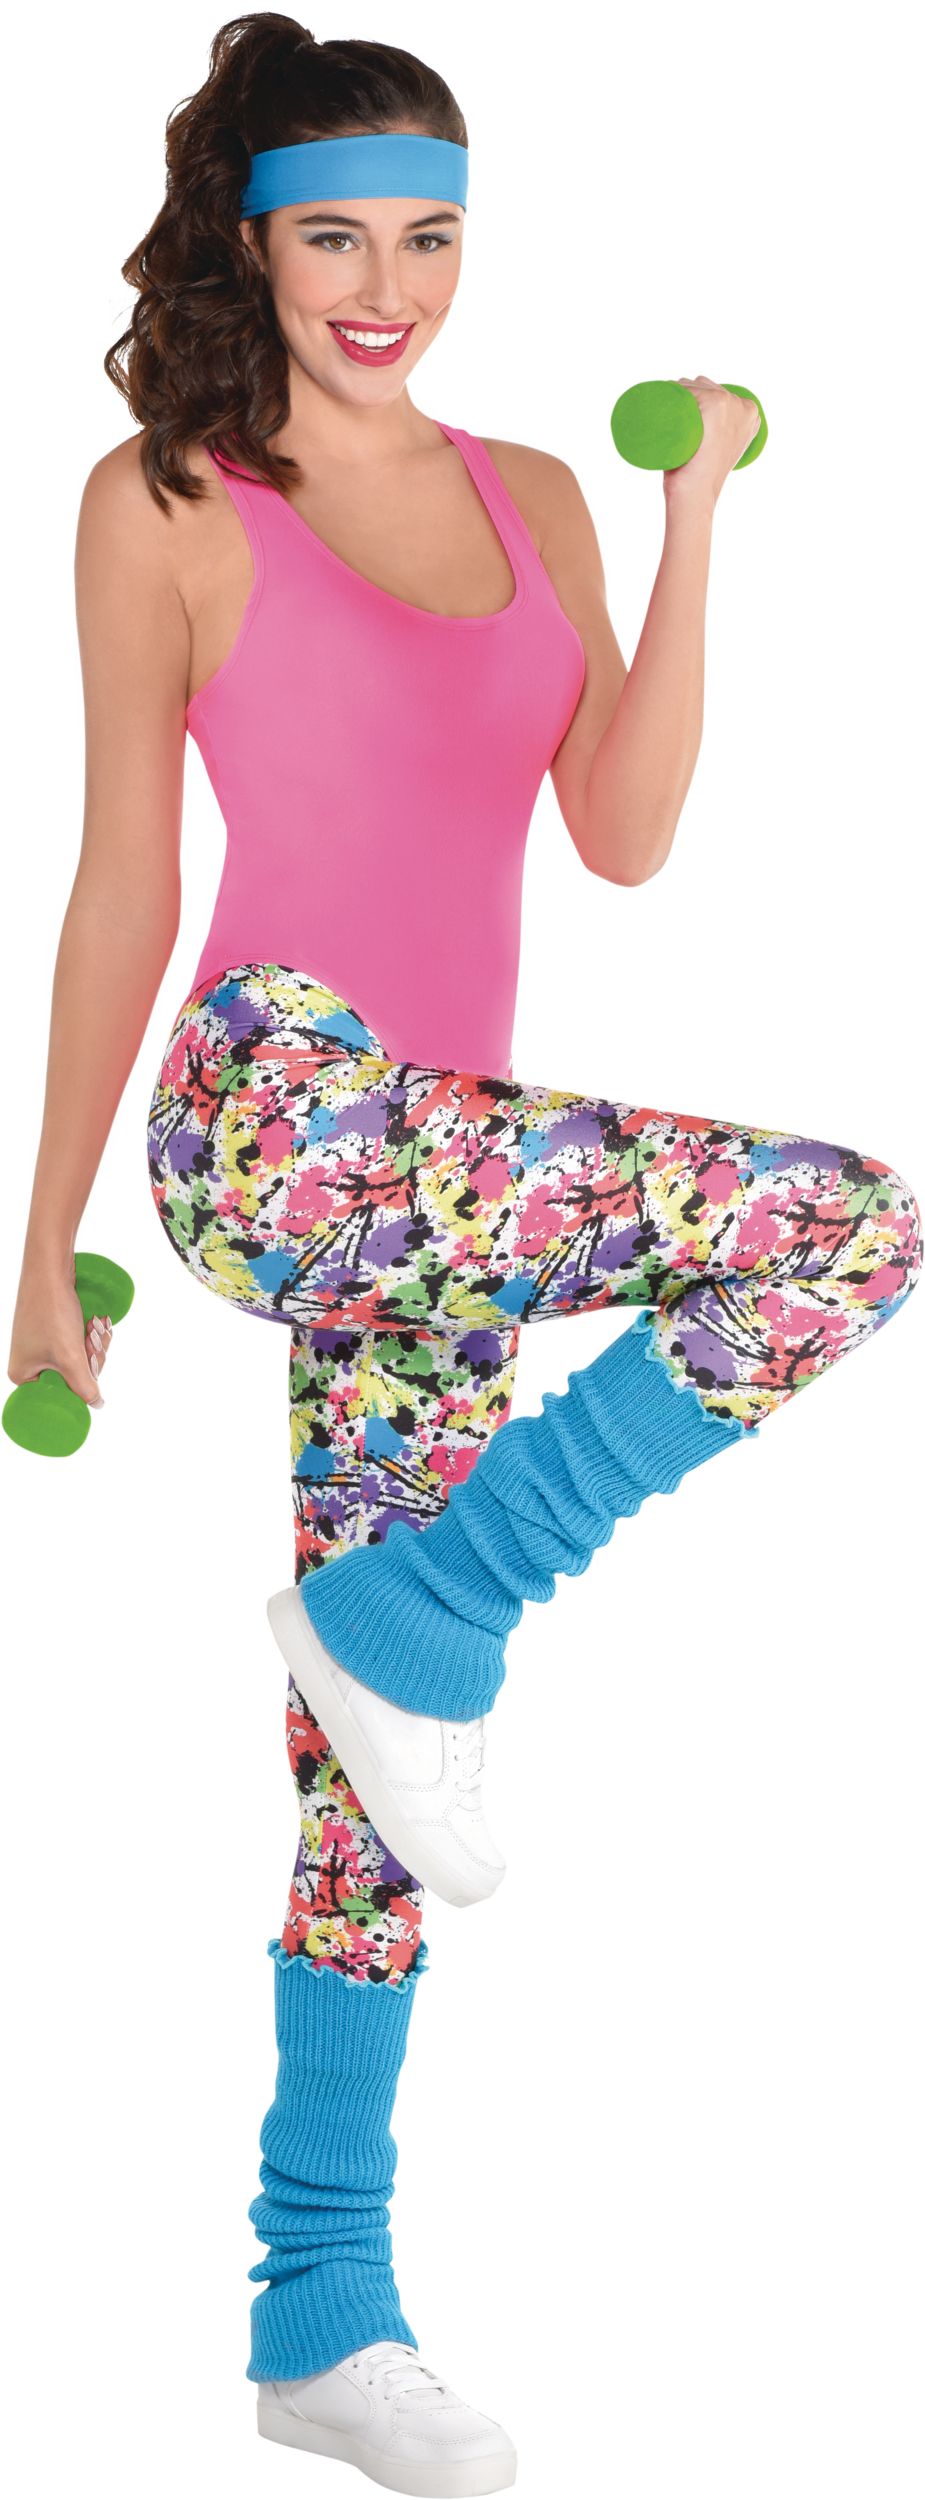 Adult 1980s Exercise Outfit with Body Suit, Leg Warmers & Head Sweatband,  Pink/Blue, 4-pk, Costume Accessories for Halloween